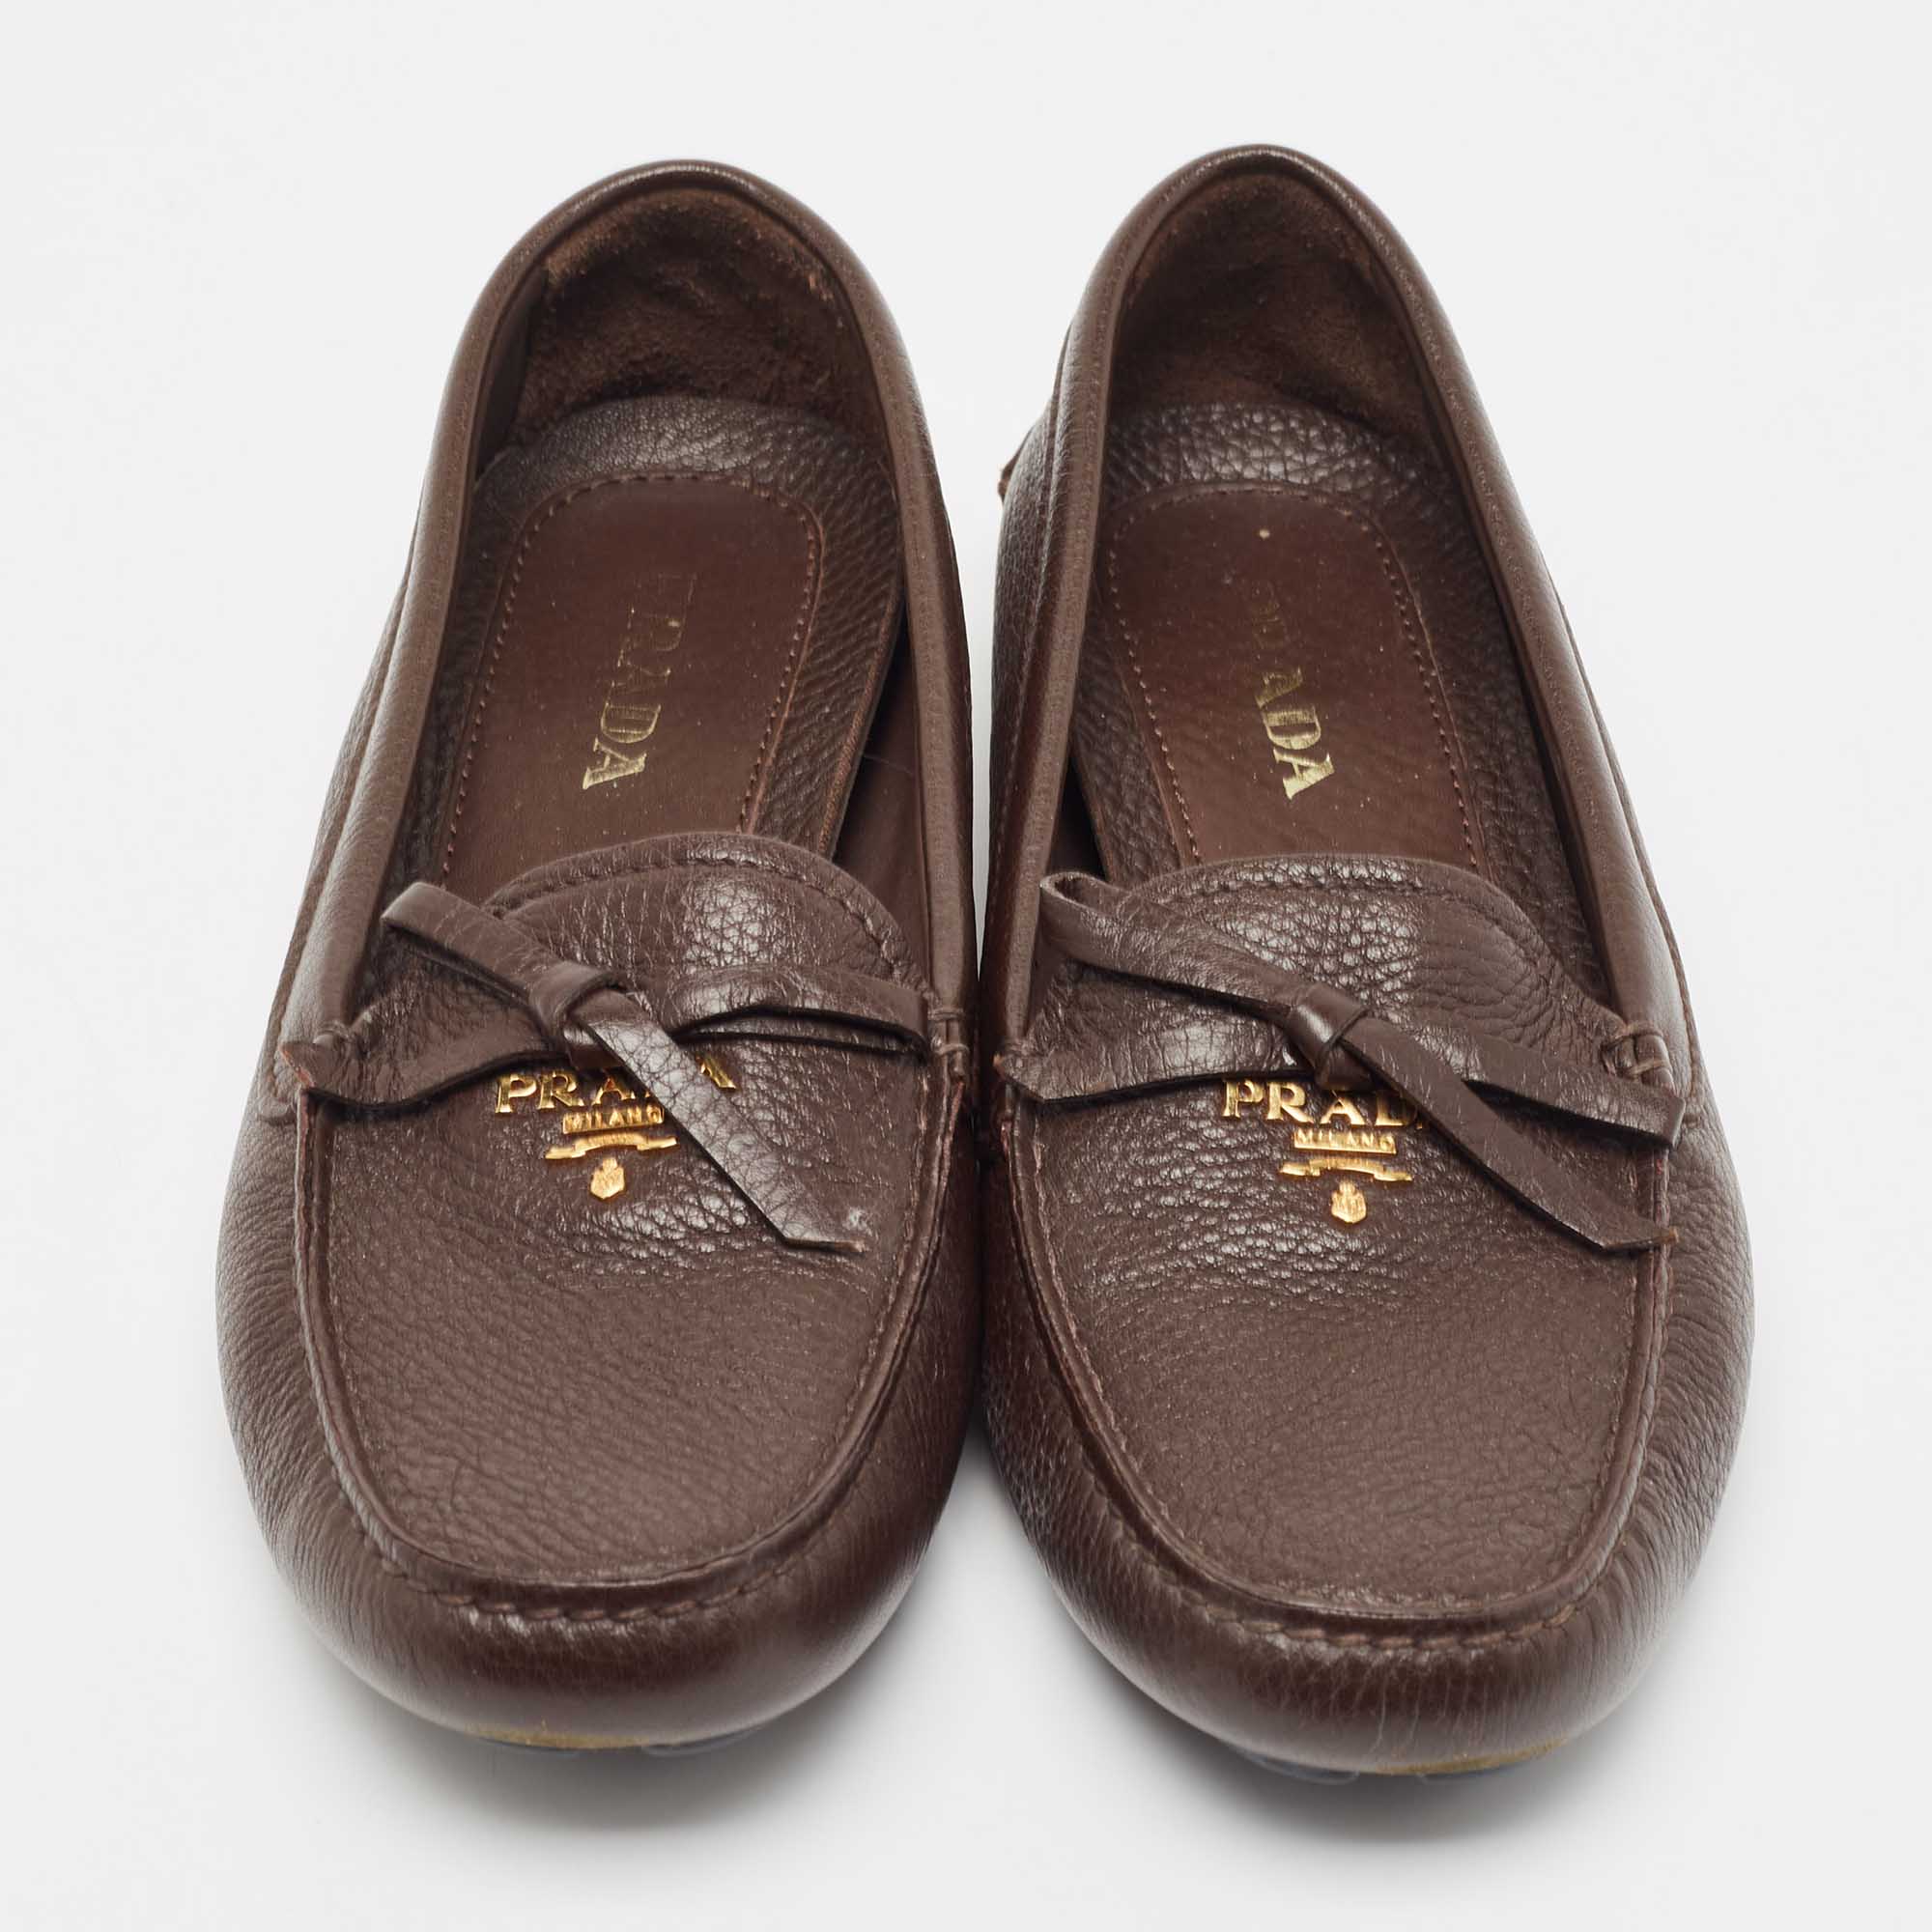 Prada Brown Leather Logo Detail Bow Loafers Size 38.5